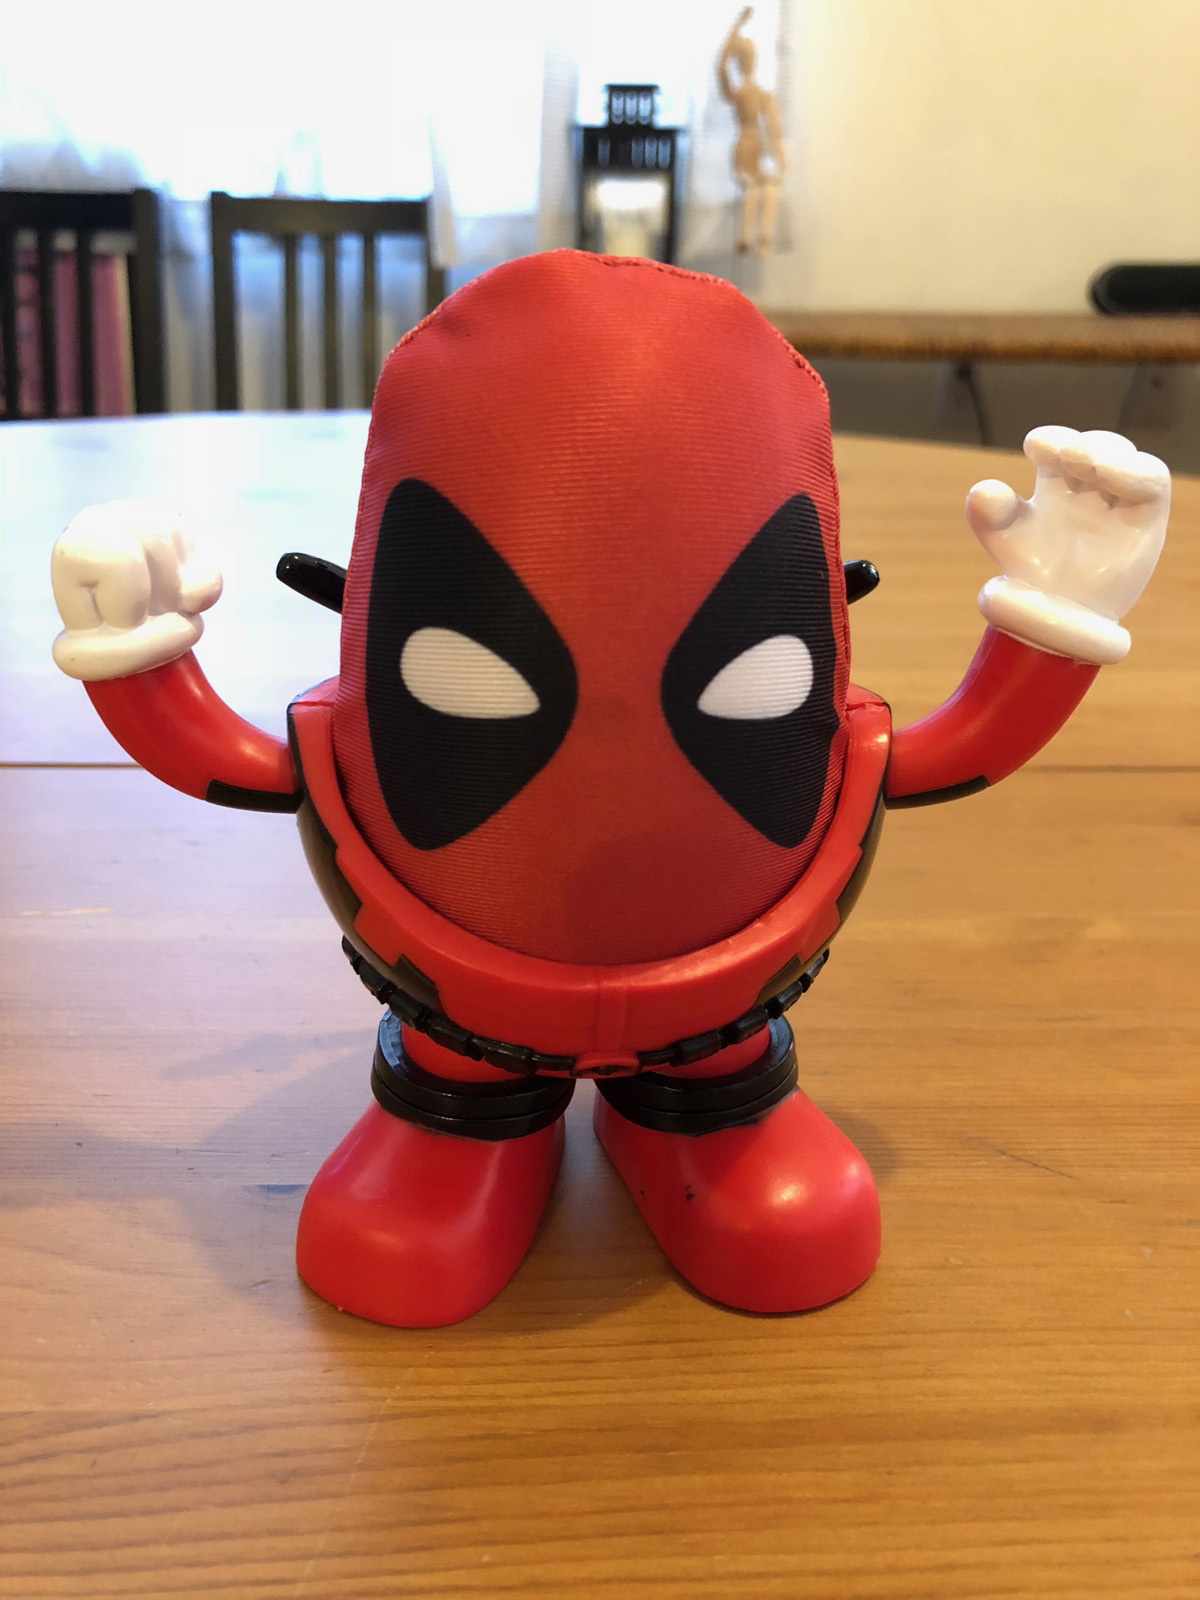 May Loot Crate DX Deadpool Edition